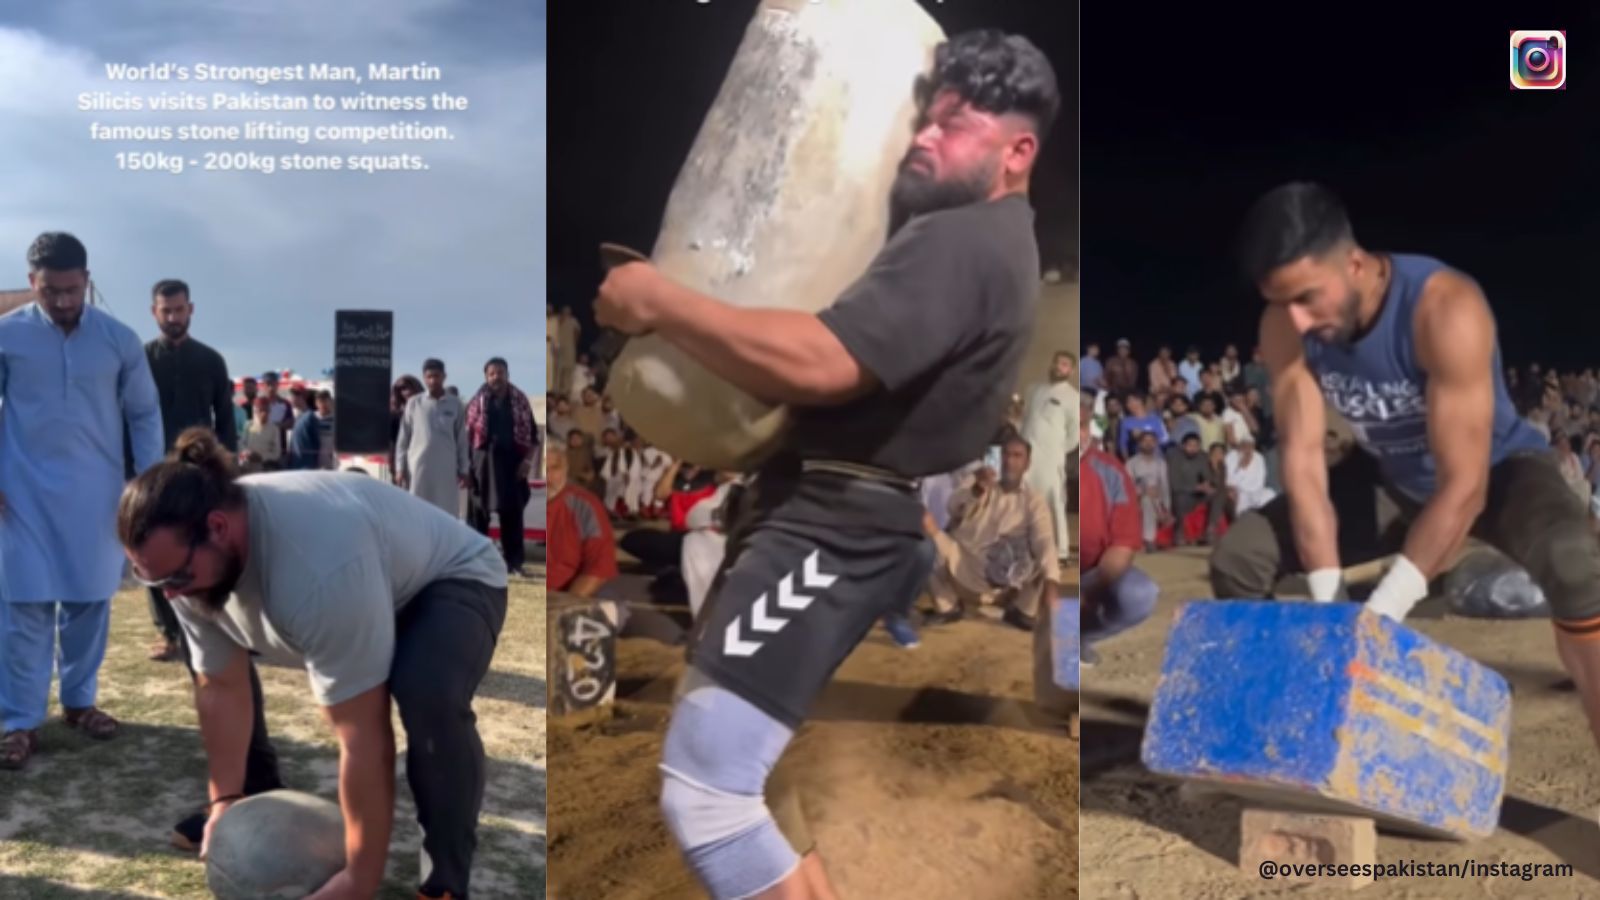 android, ‘world’s strongest man’ visits pakistan for traditional stone-lifting championship, sport grabs international attention